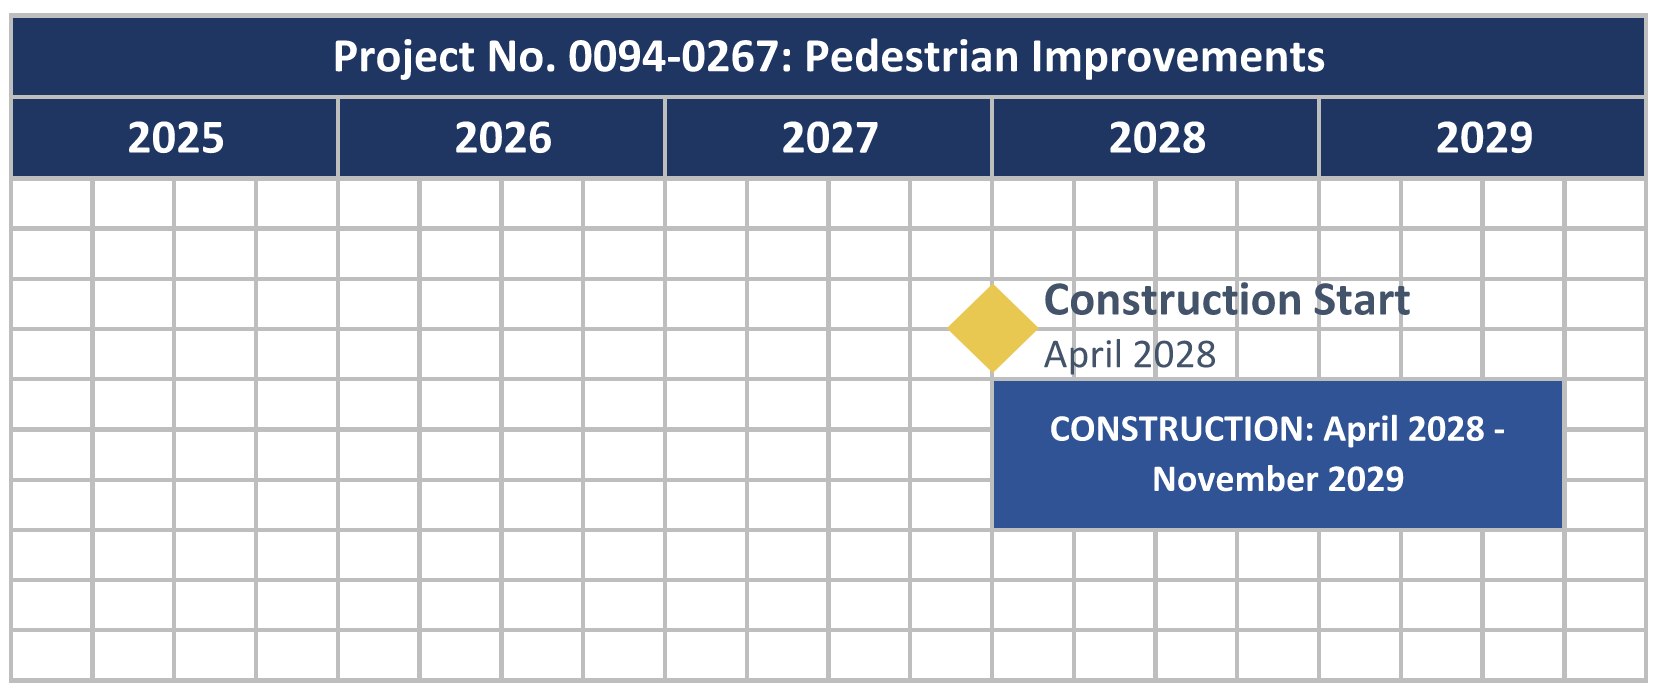 graphic calendar spanning from 2025 to 2029 that outlines the pedestrian improvements project timeline